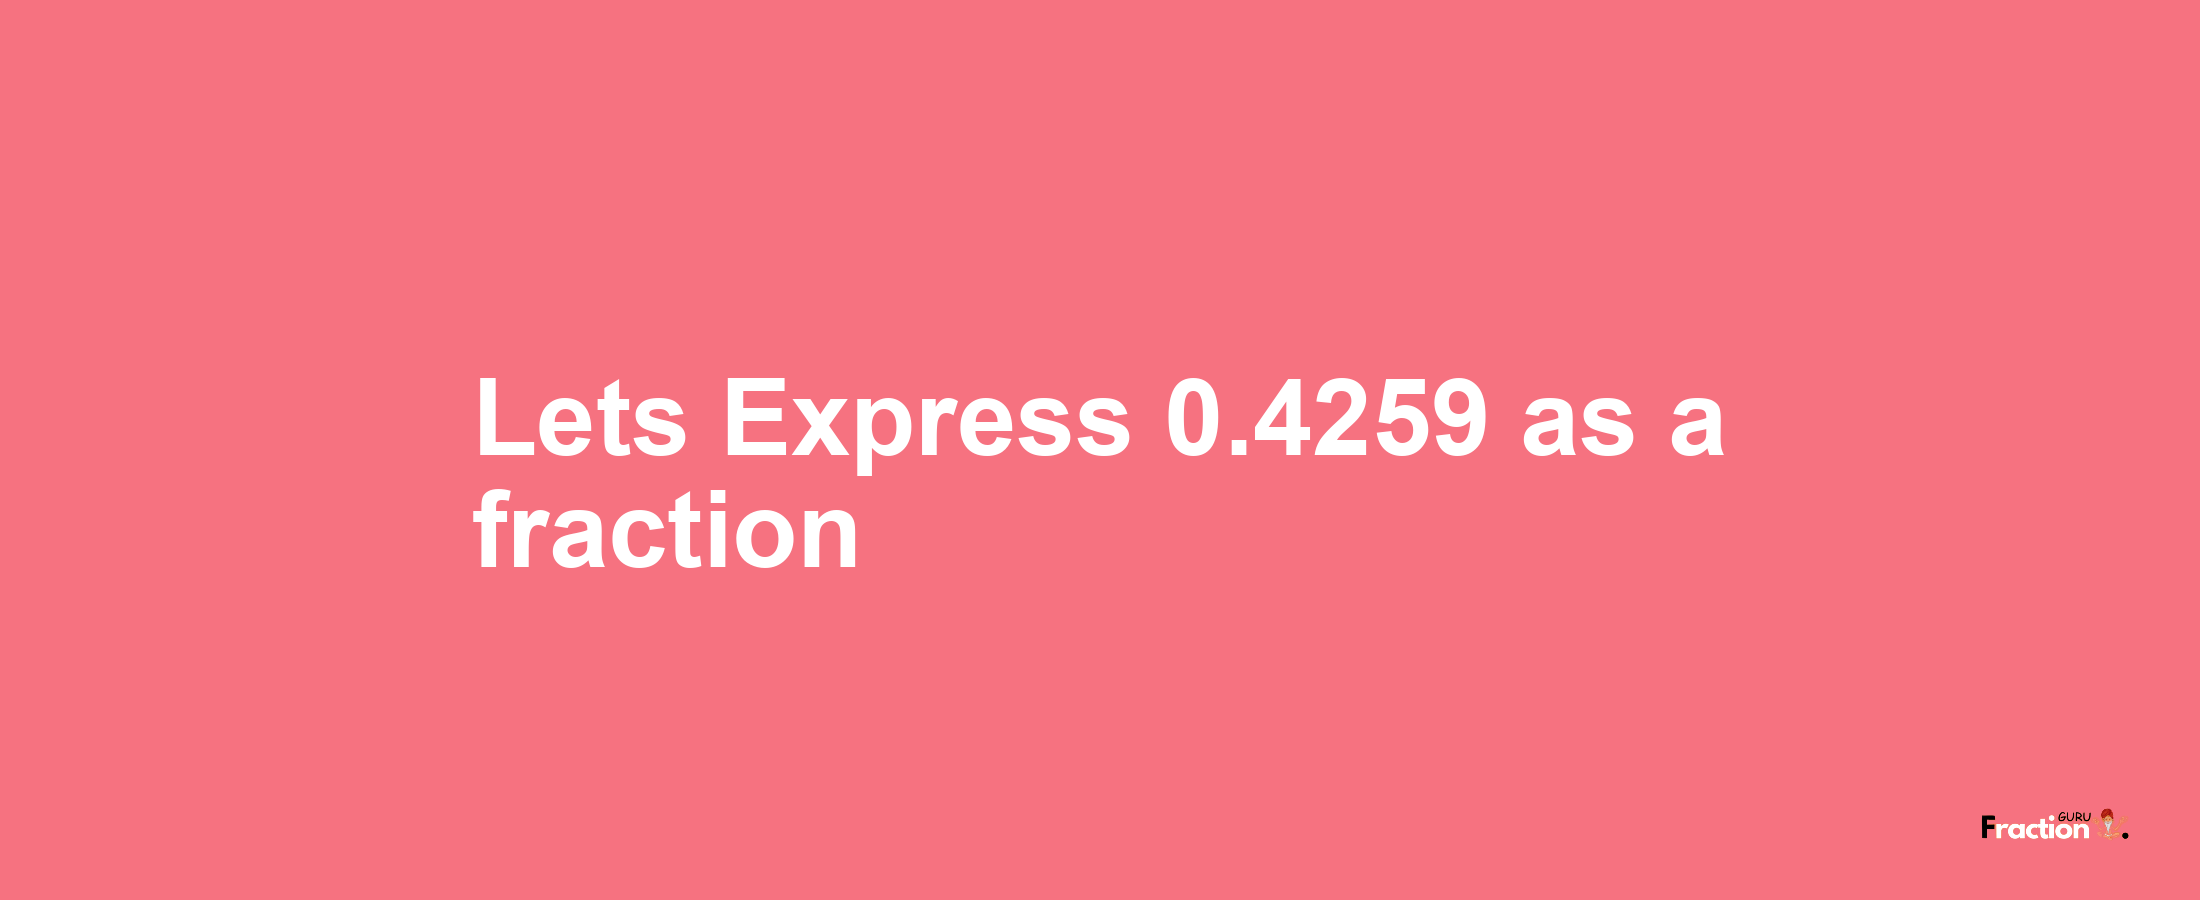 Lets Express 0.4259 as afraction